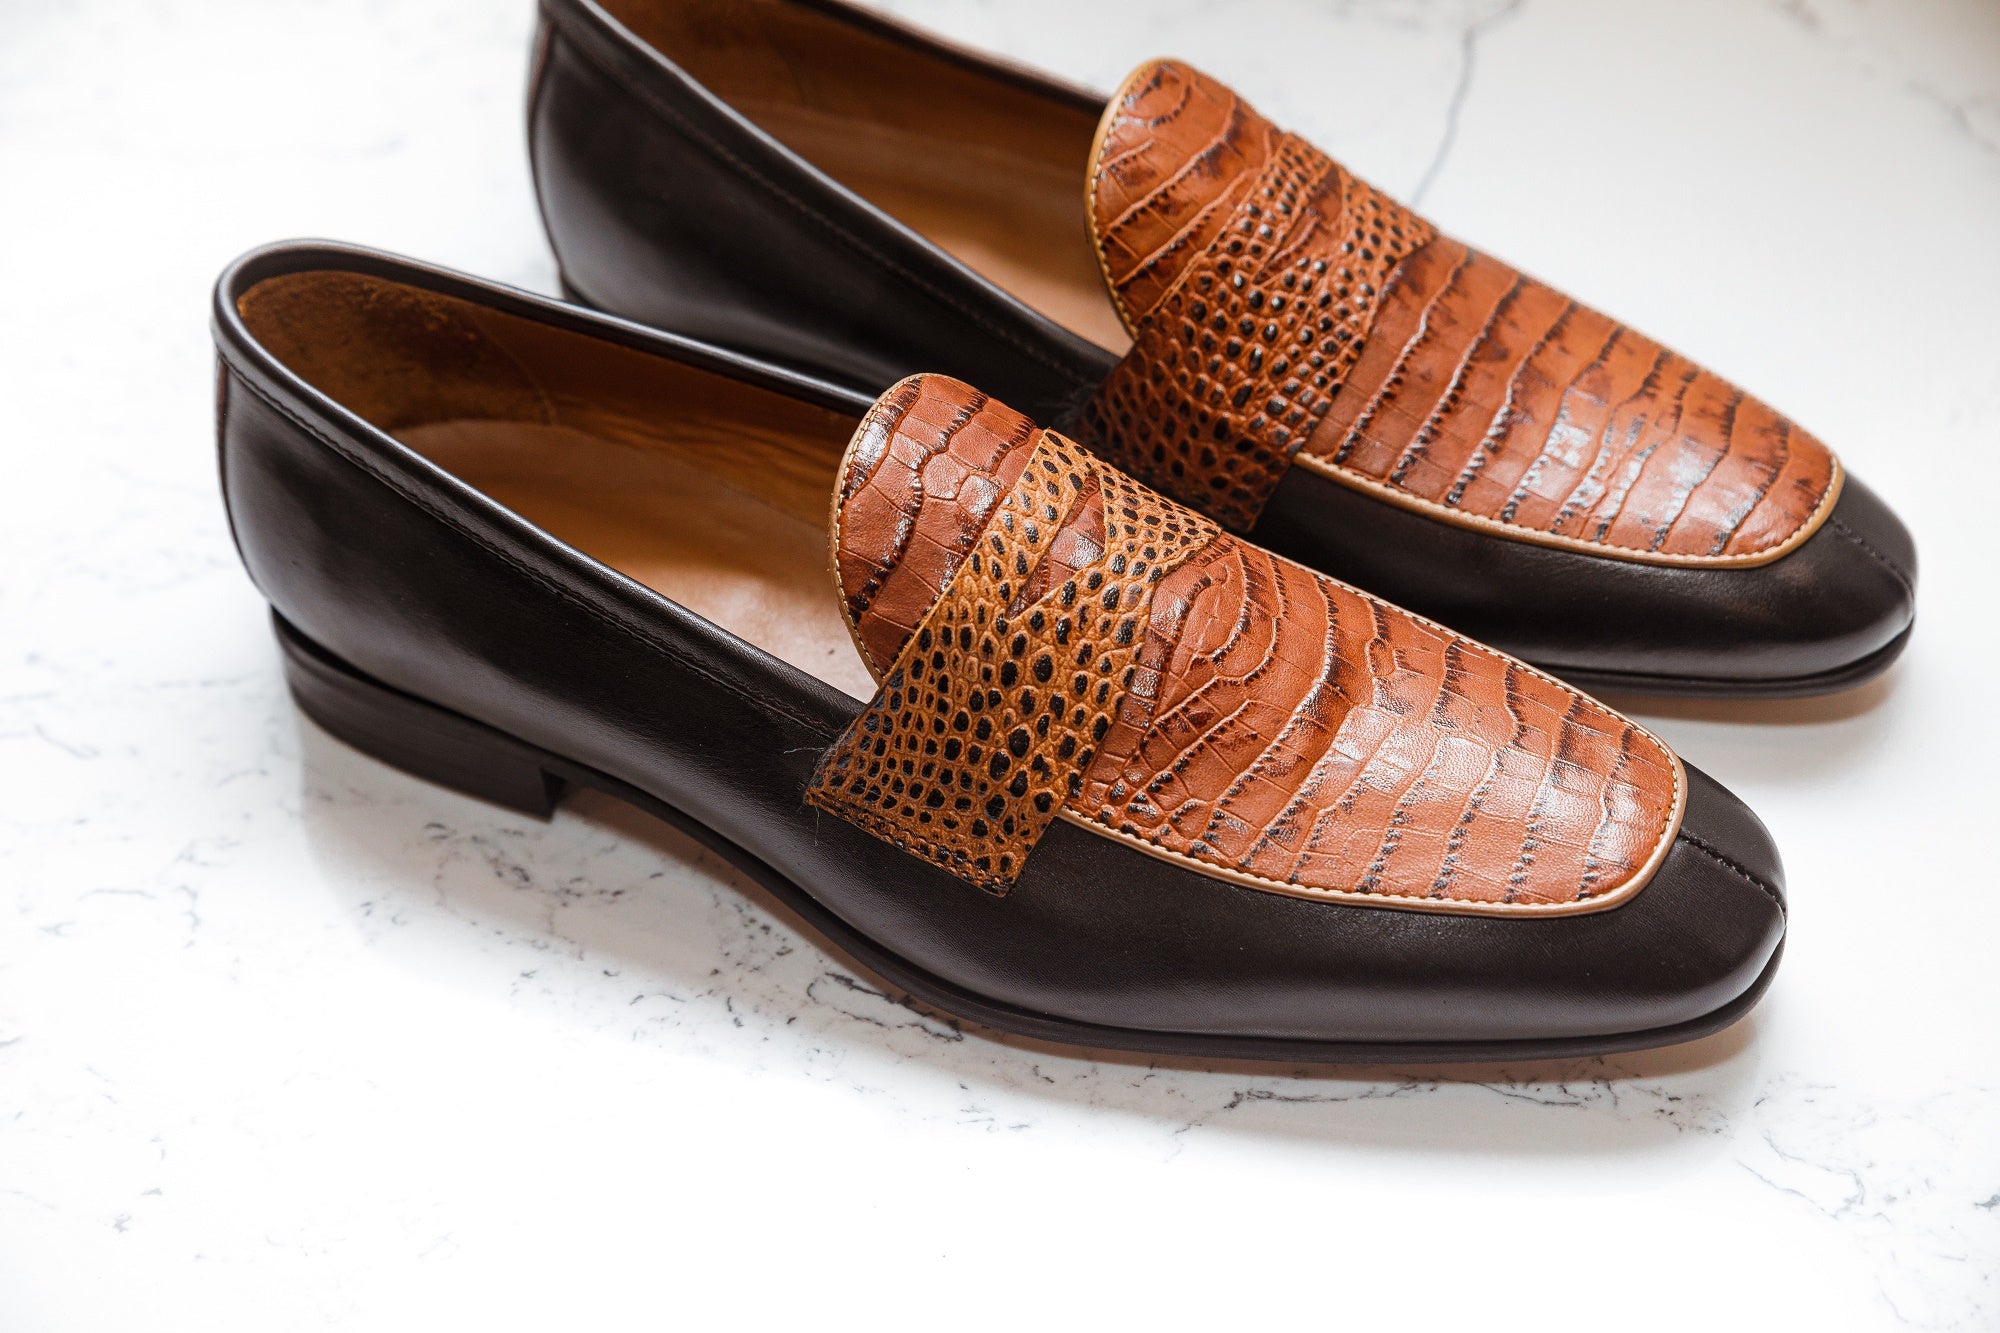 The Cali Loafers - Loafers by Urbbana